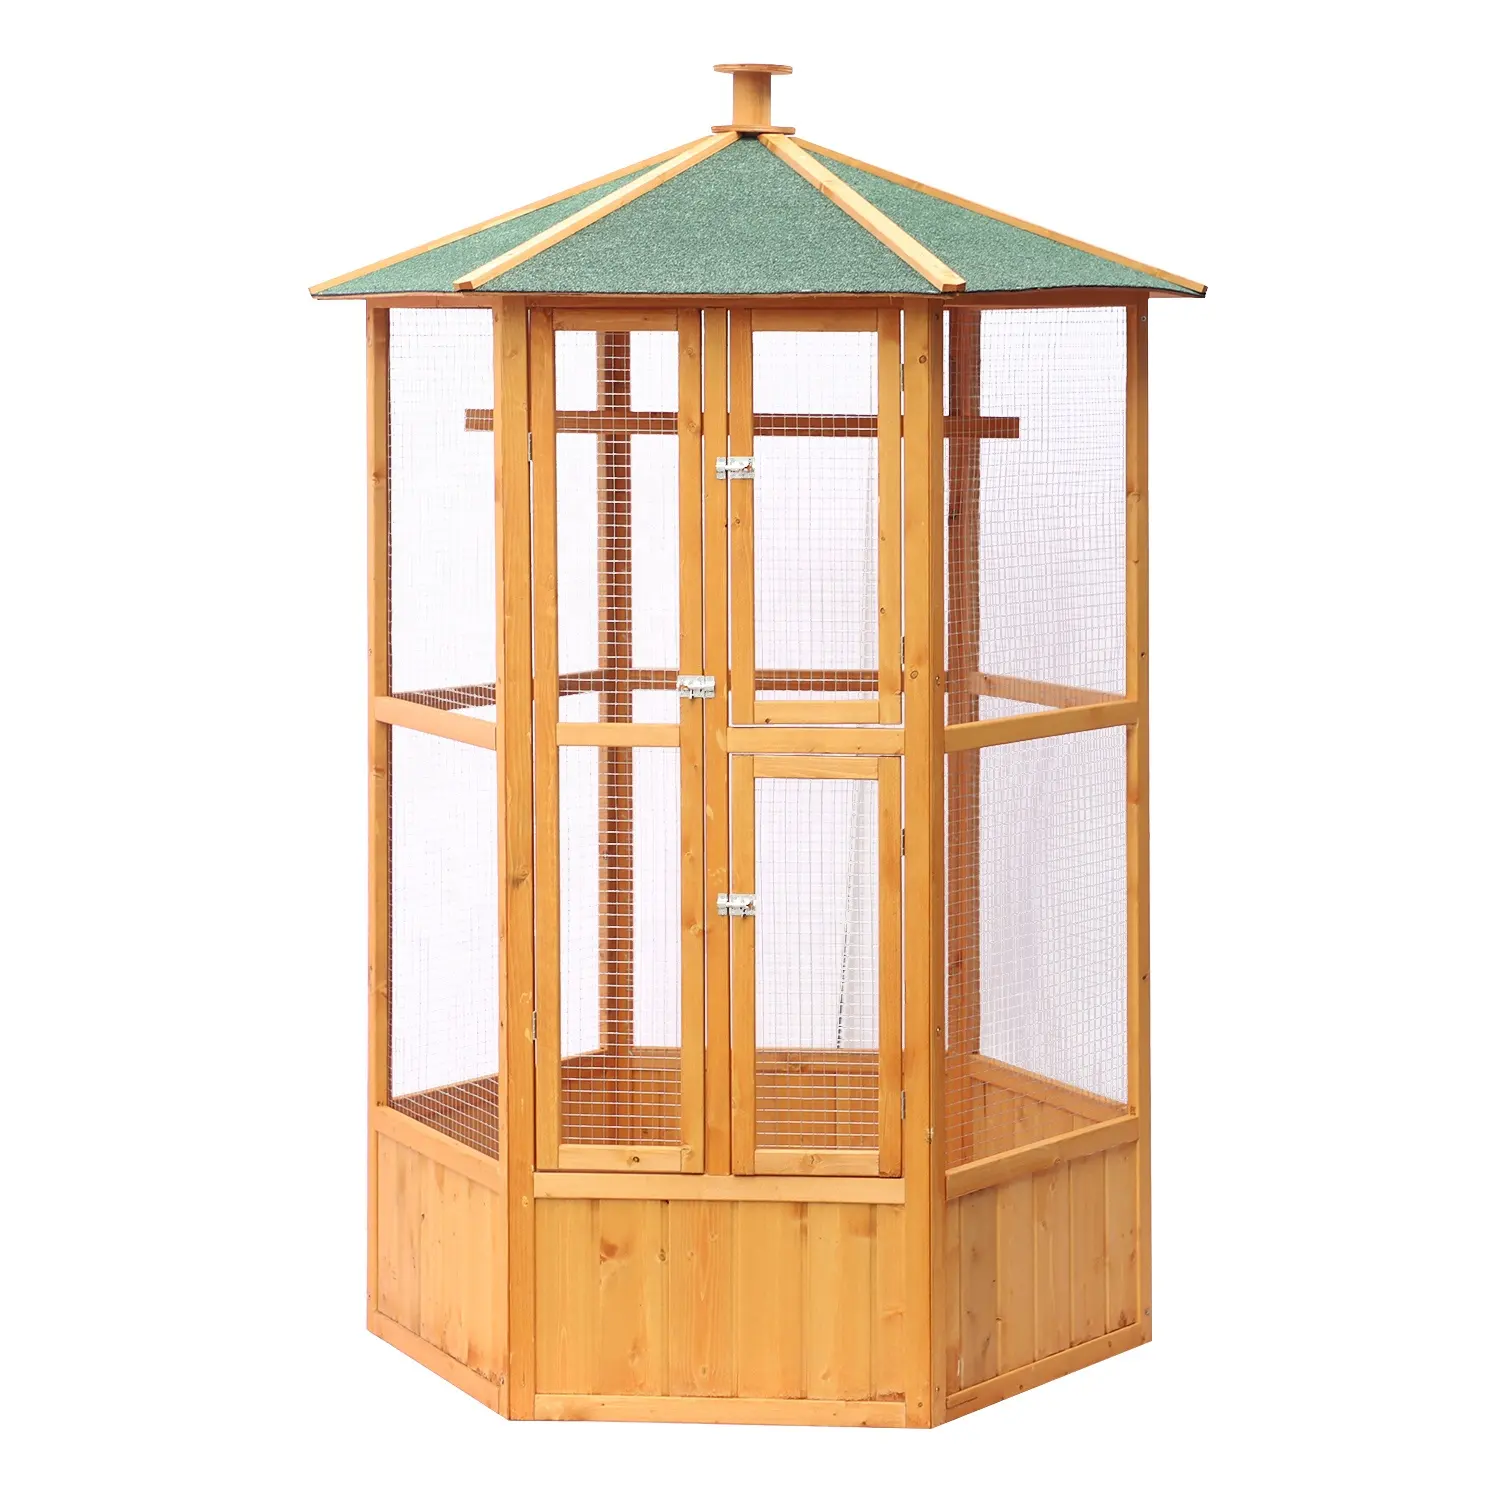 XPT017 Wooden Pet Cages Bird Cage NATURAL color for outdoor farm house